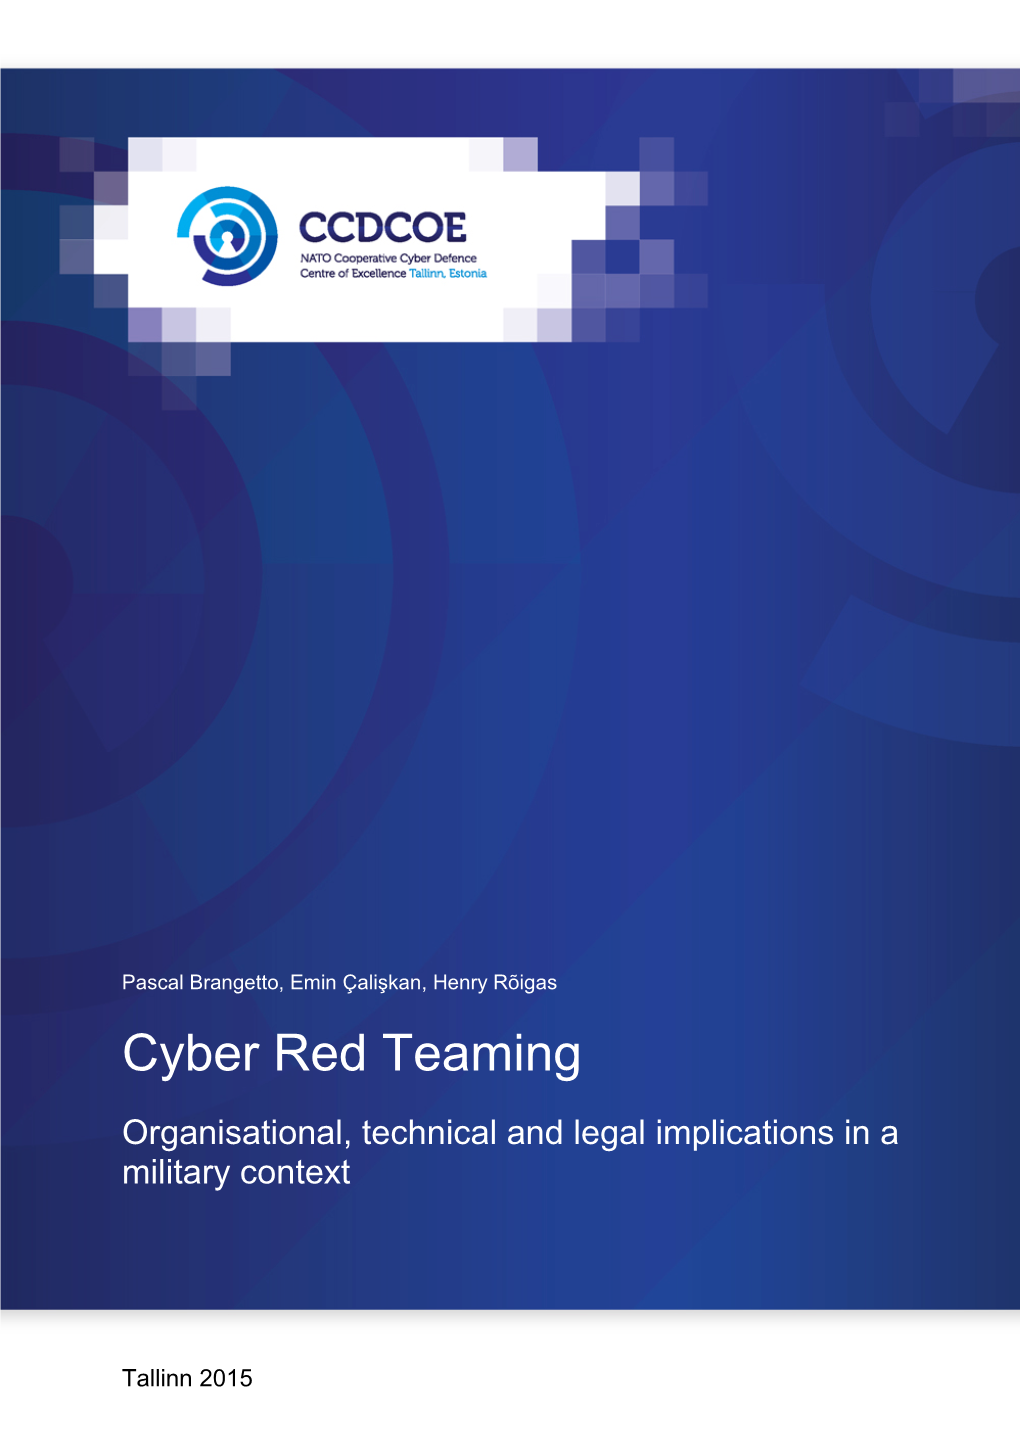 Cyber Red Teaming Organisational, Technical and Legal Implications in a Military Context